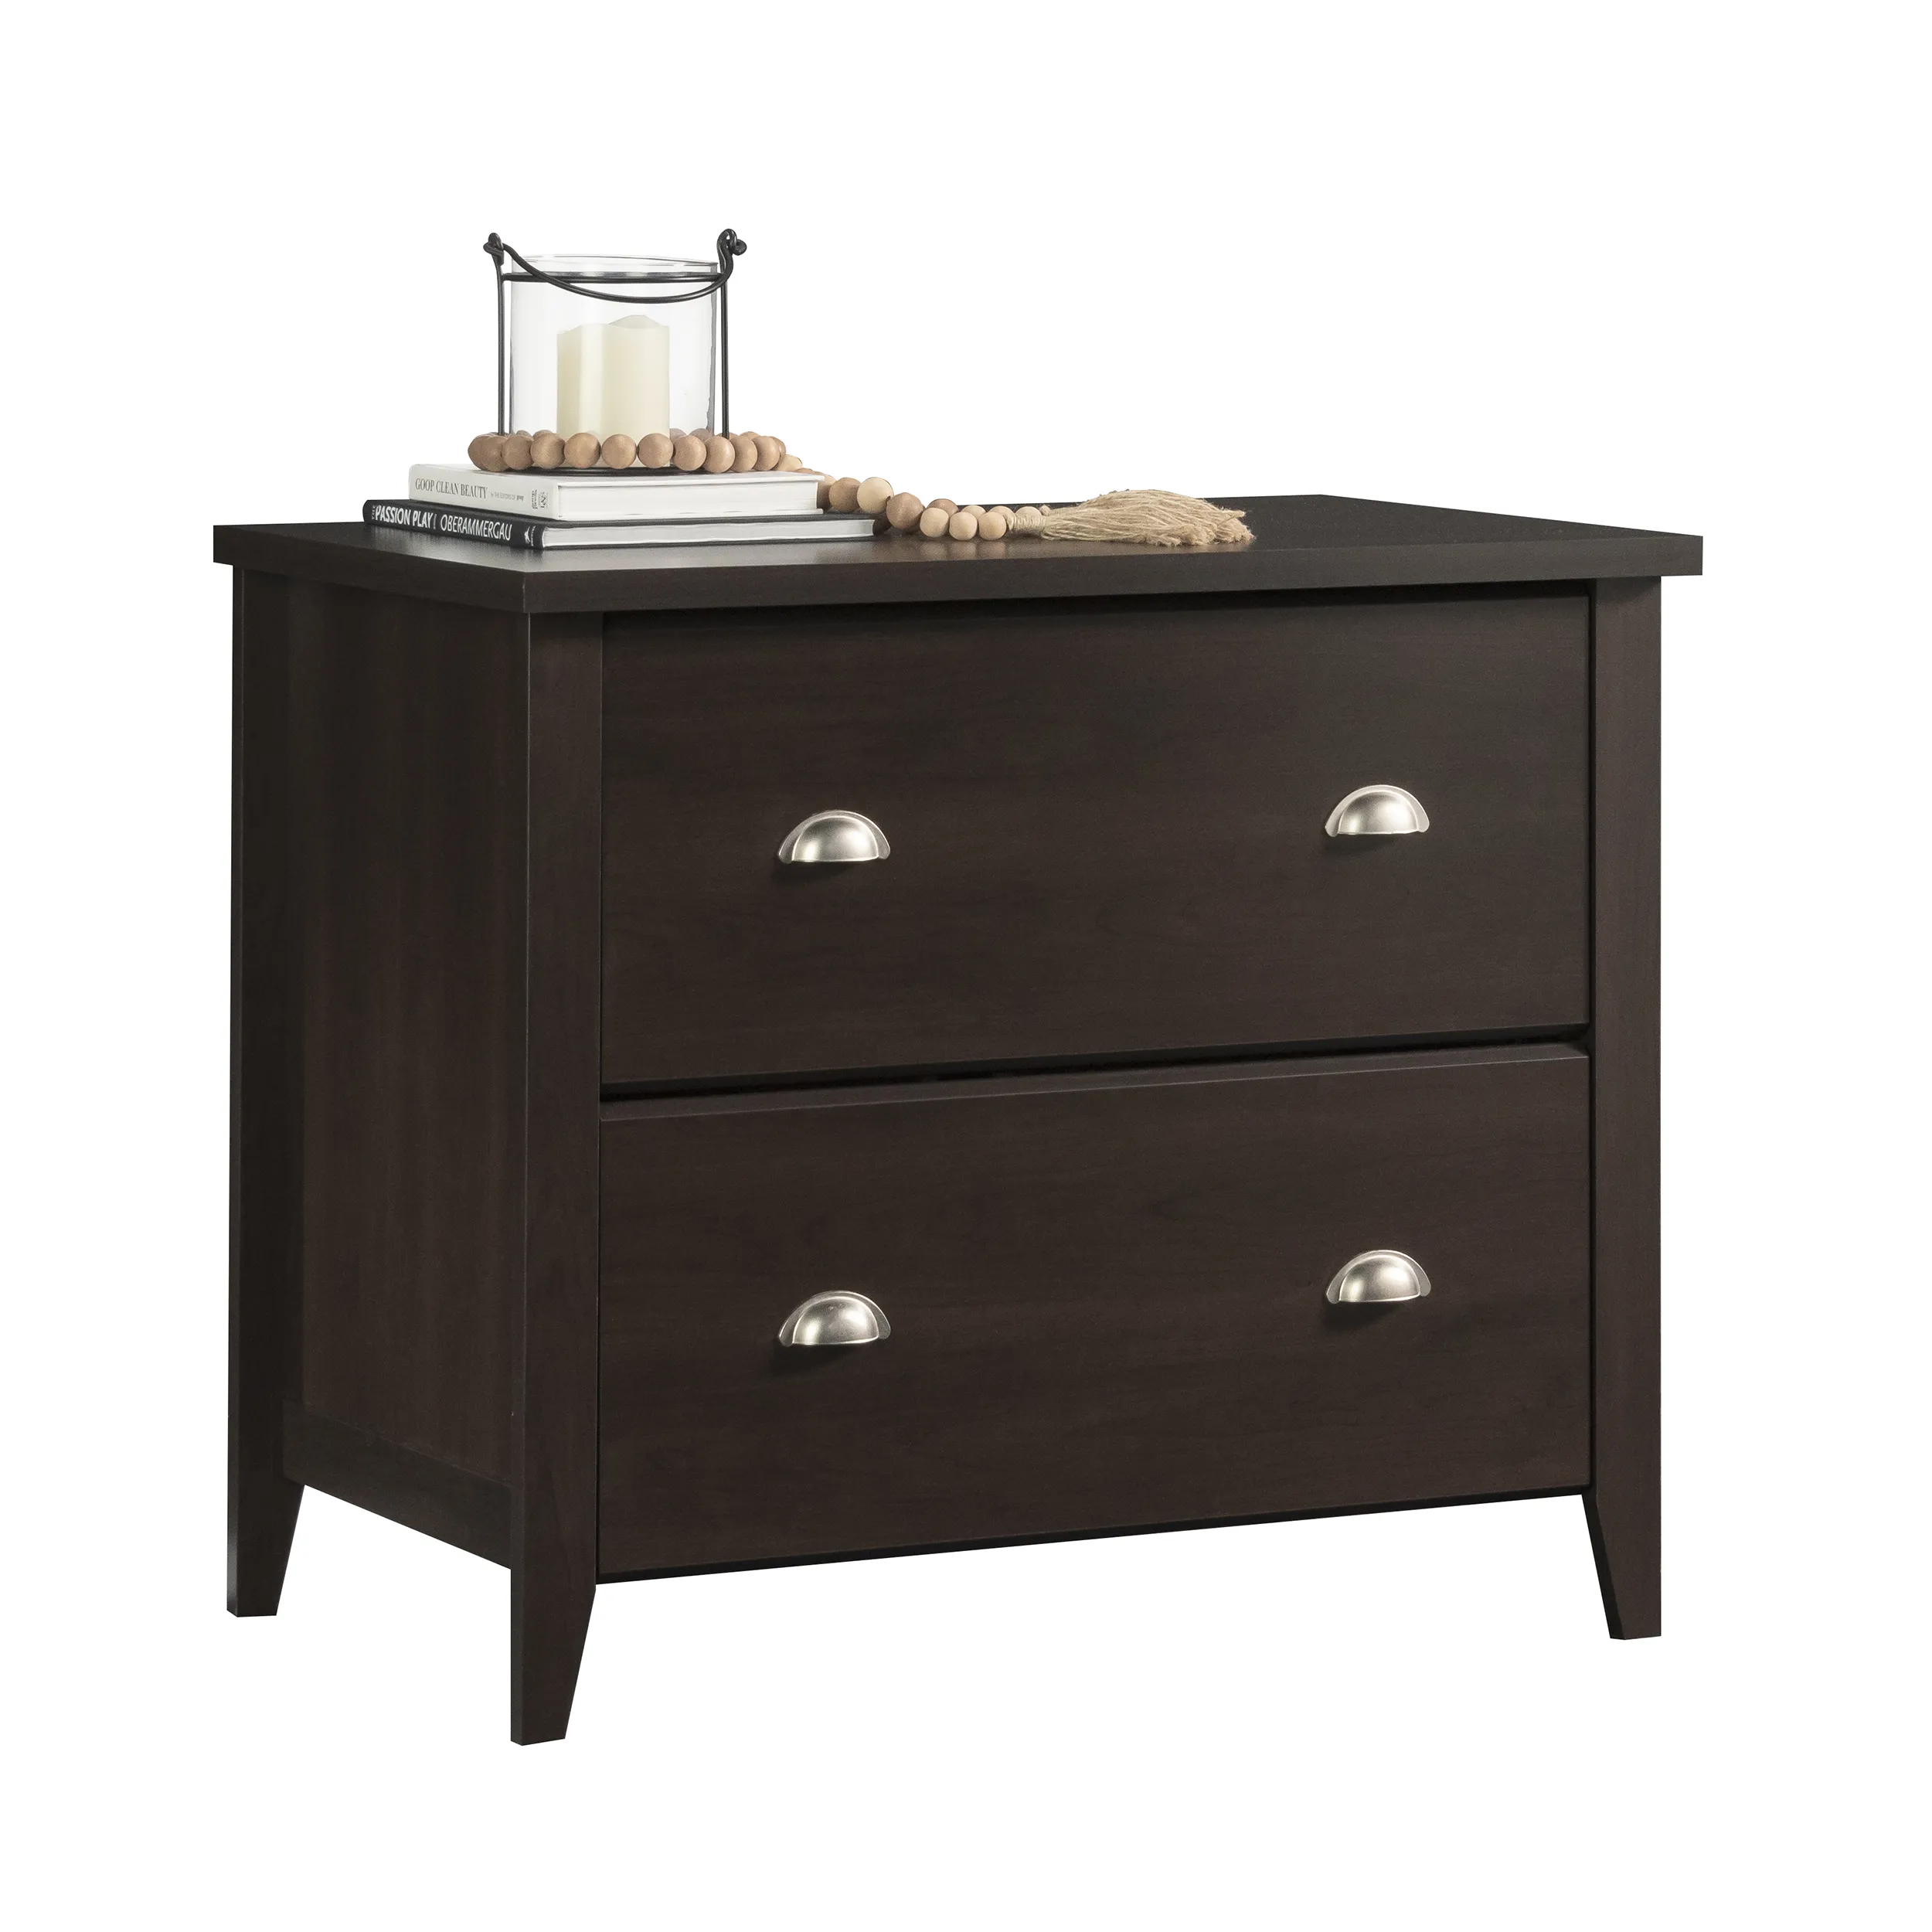 Summit Station Lateral File Cabinet